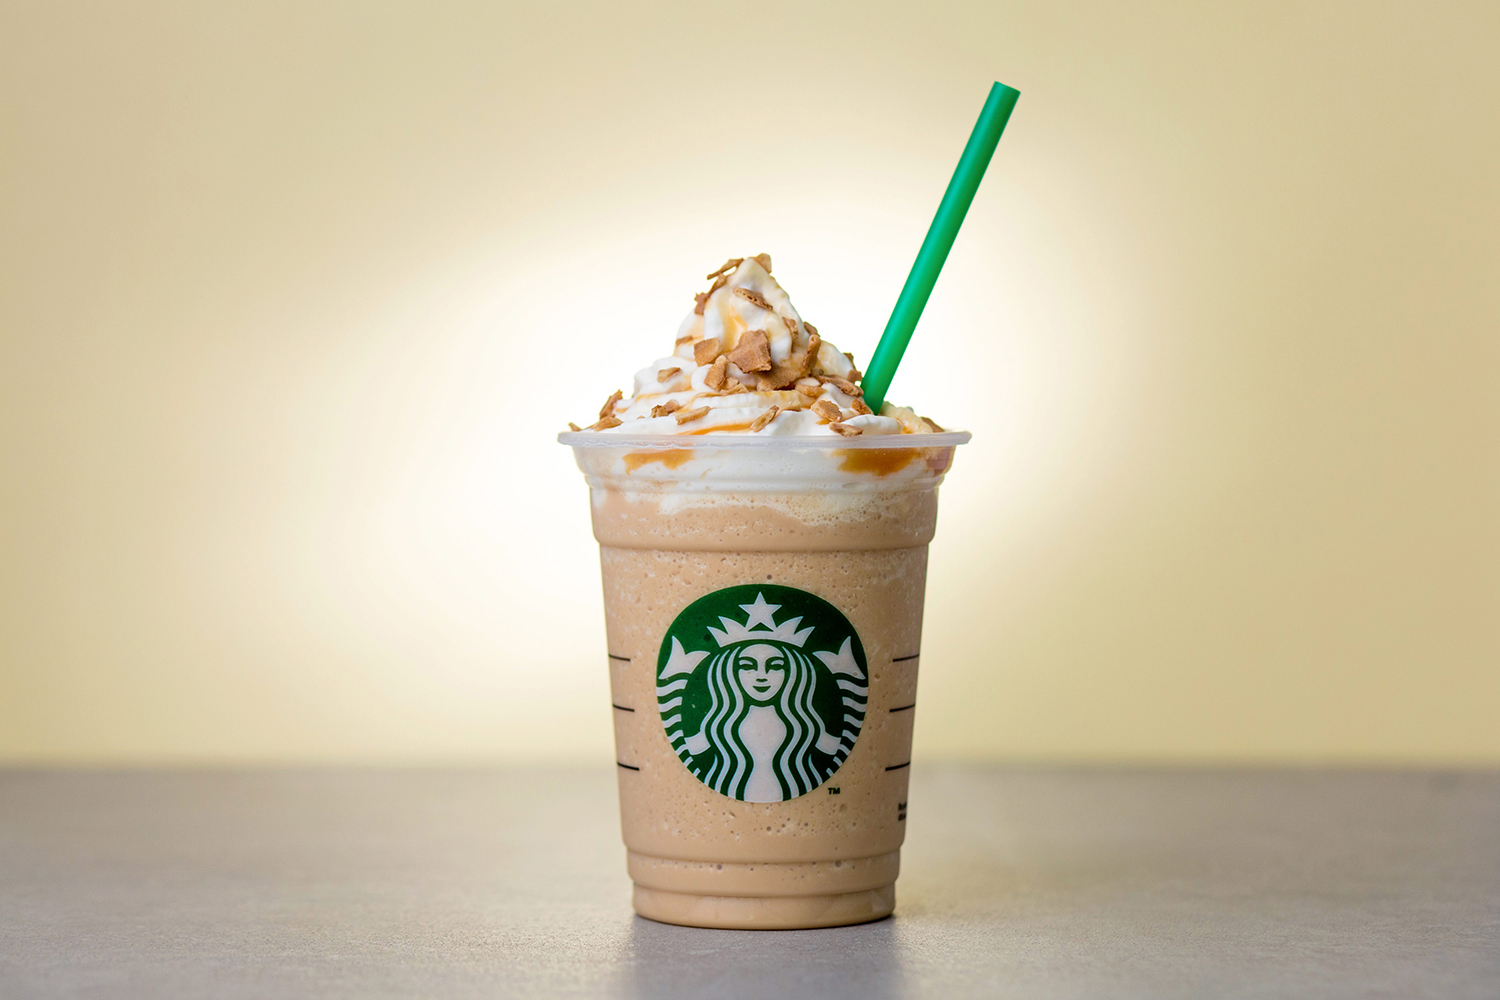 Starbucks Now Delivers Coffee And More In The Uae | Time Out Abu Dhabi